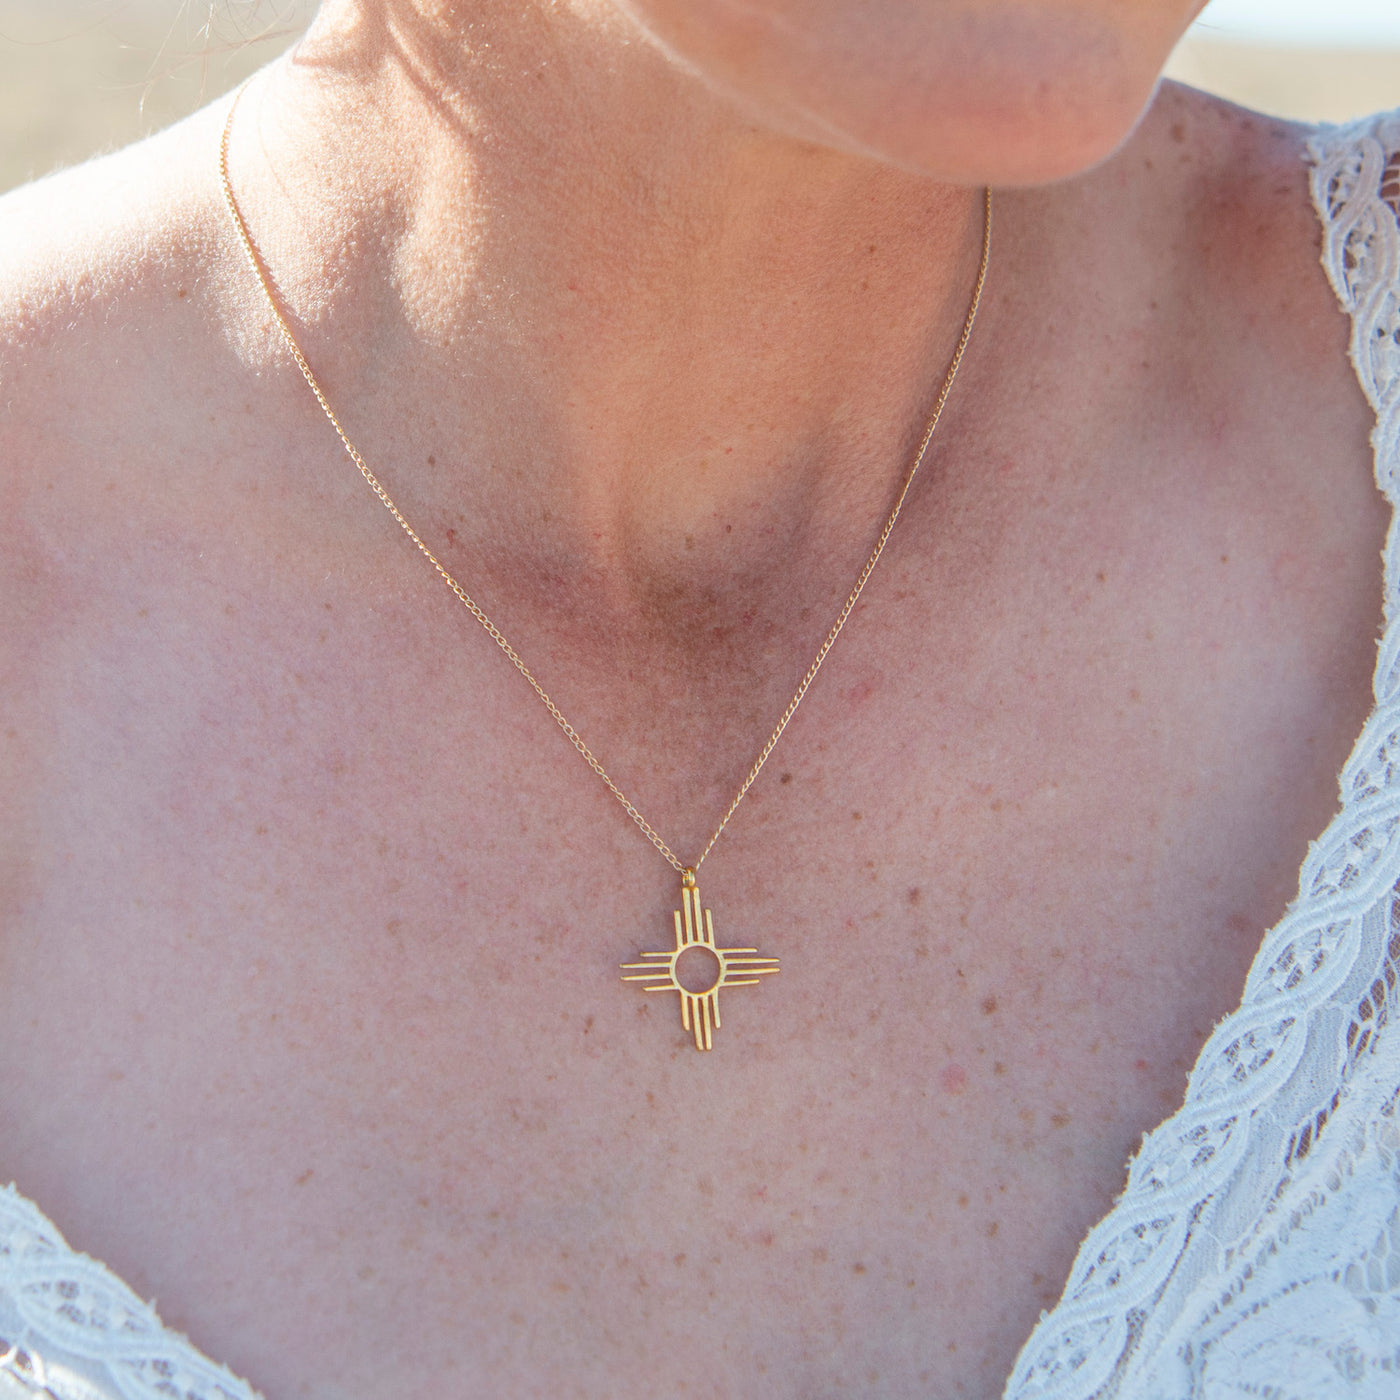 Handcrafted Gold Zia Symbol Necklace | T.Skies Jewelry